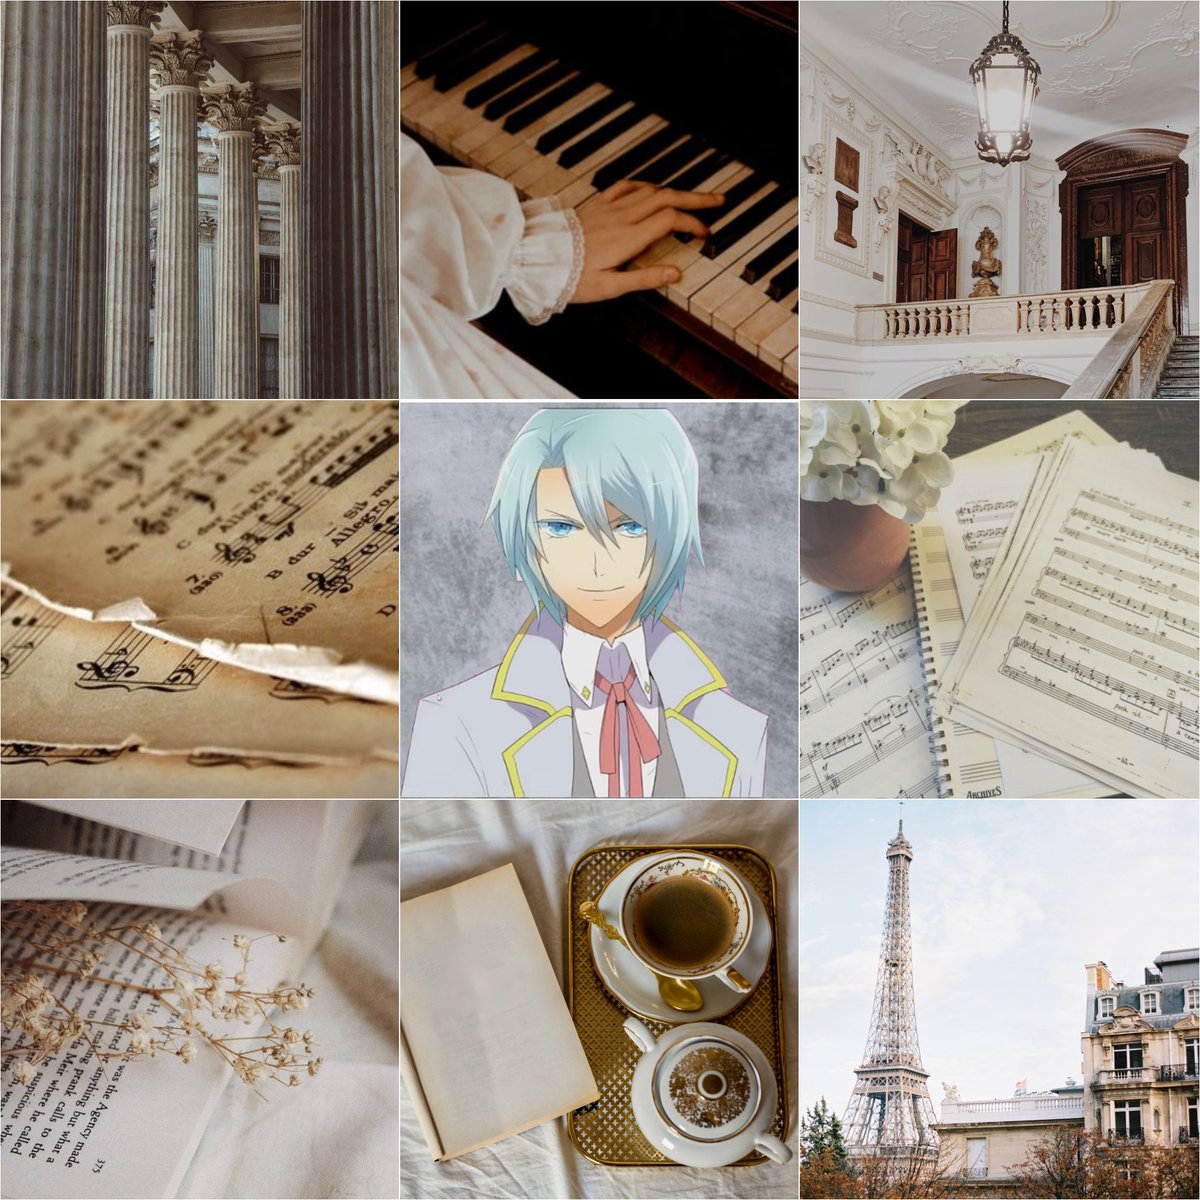 Y'all fw these fantail brothers aesthetic boards I made yes or yes? #hatofulboyfriend